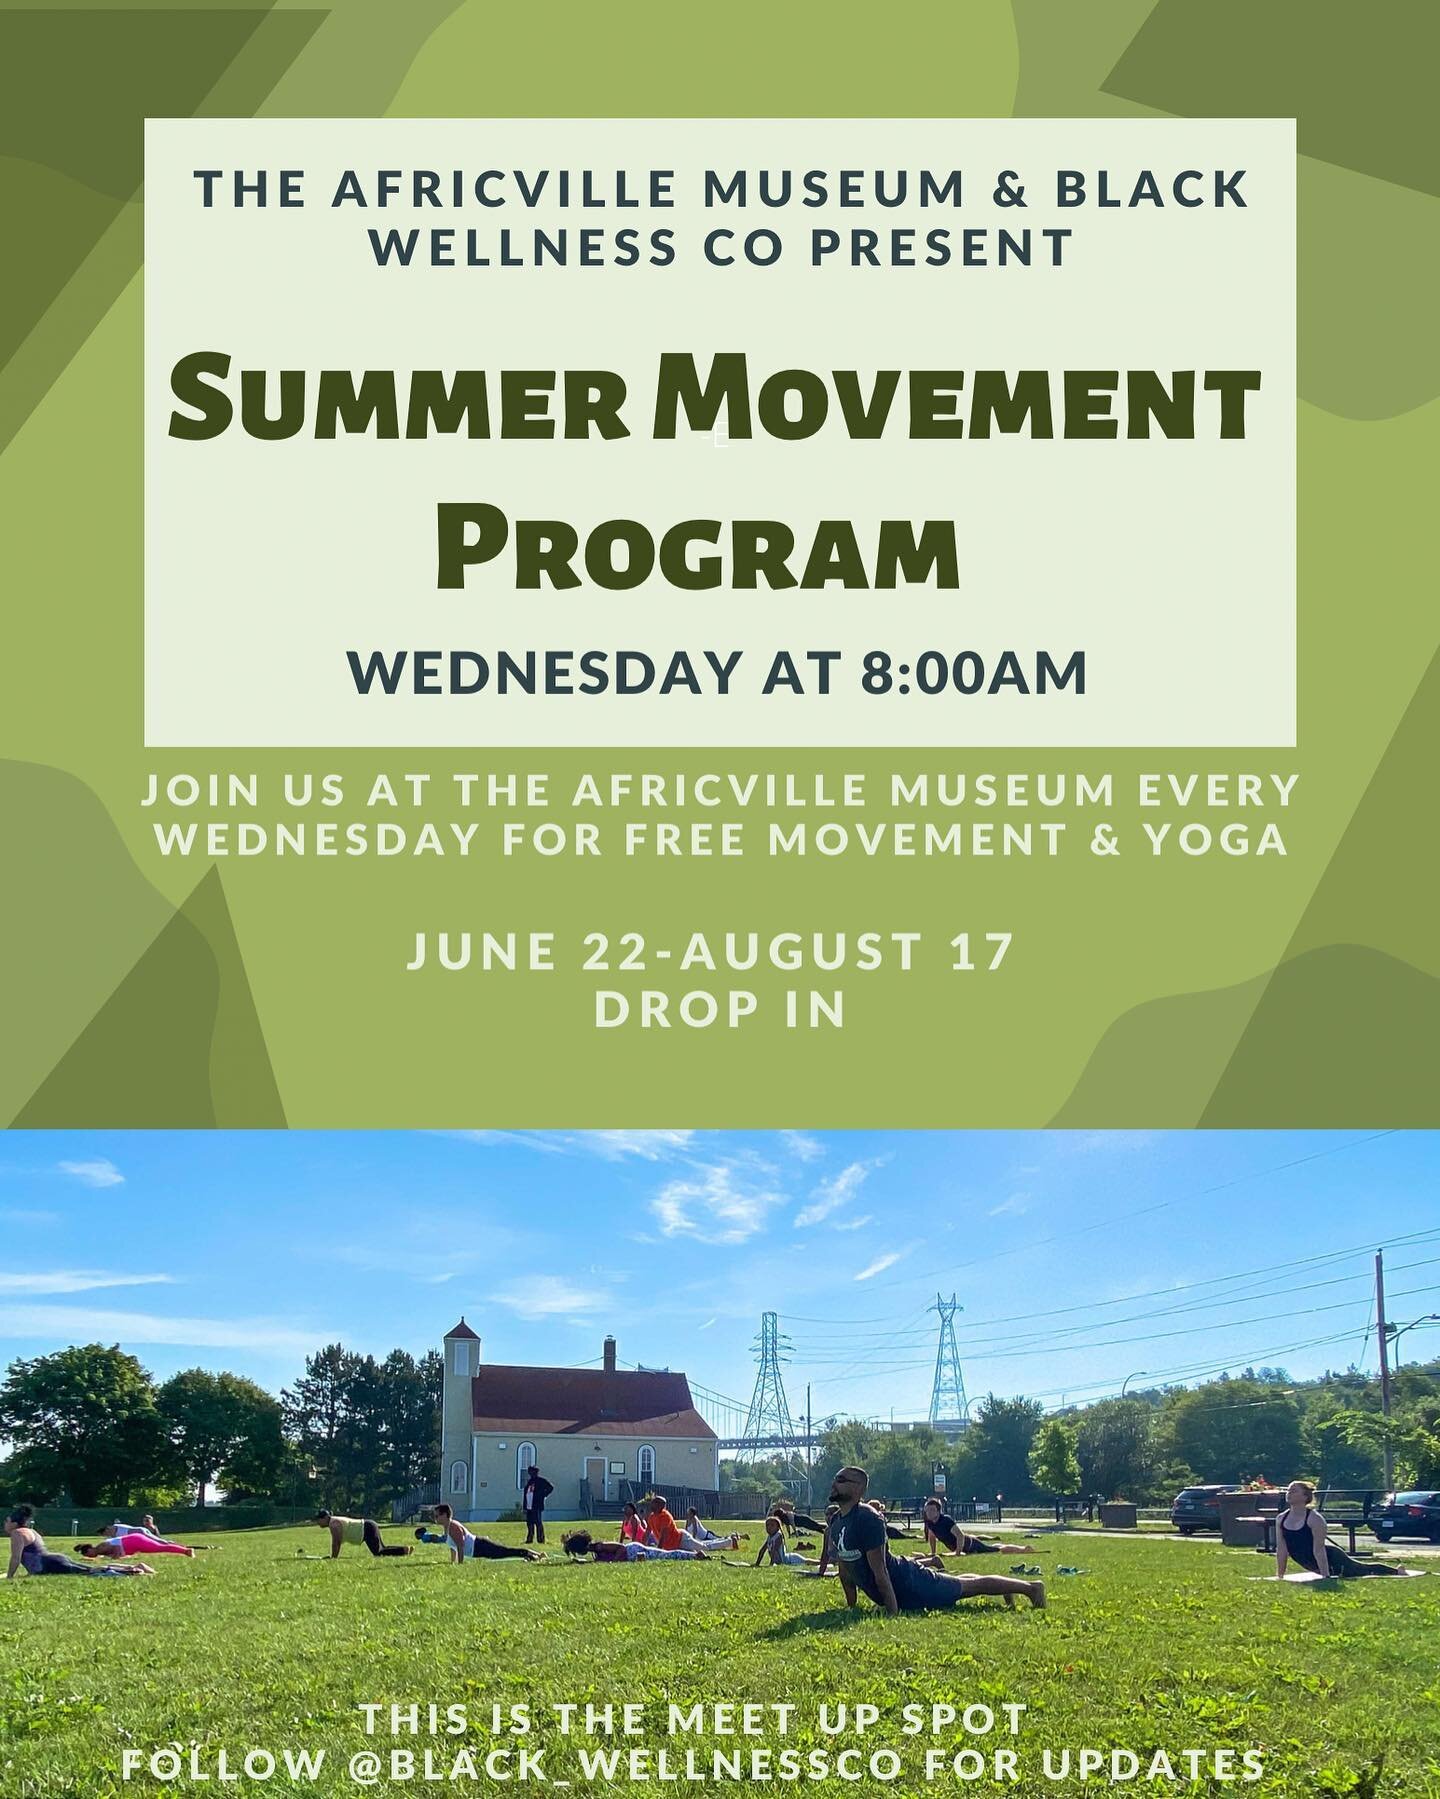 Join us for another summer at Africville!

Every Wednesday at 8 AM this summer we will be holding yoga and movement classes!
Our program starts this Wednesday June 22 and ends on August 17! 

Come through to move with BWC members and community

IMPOR